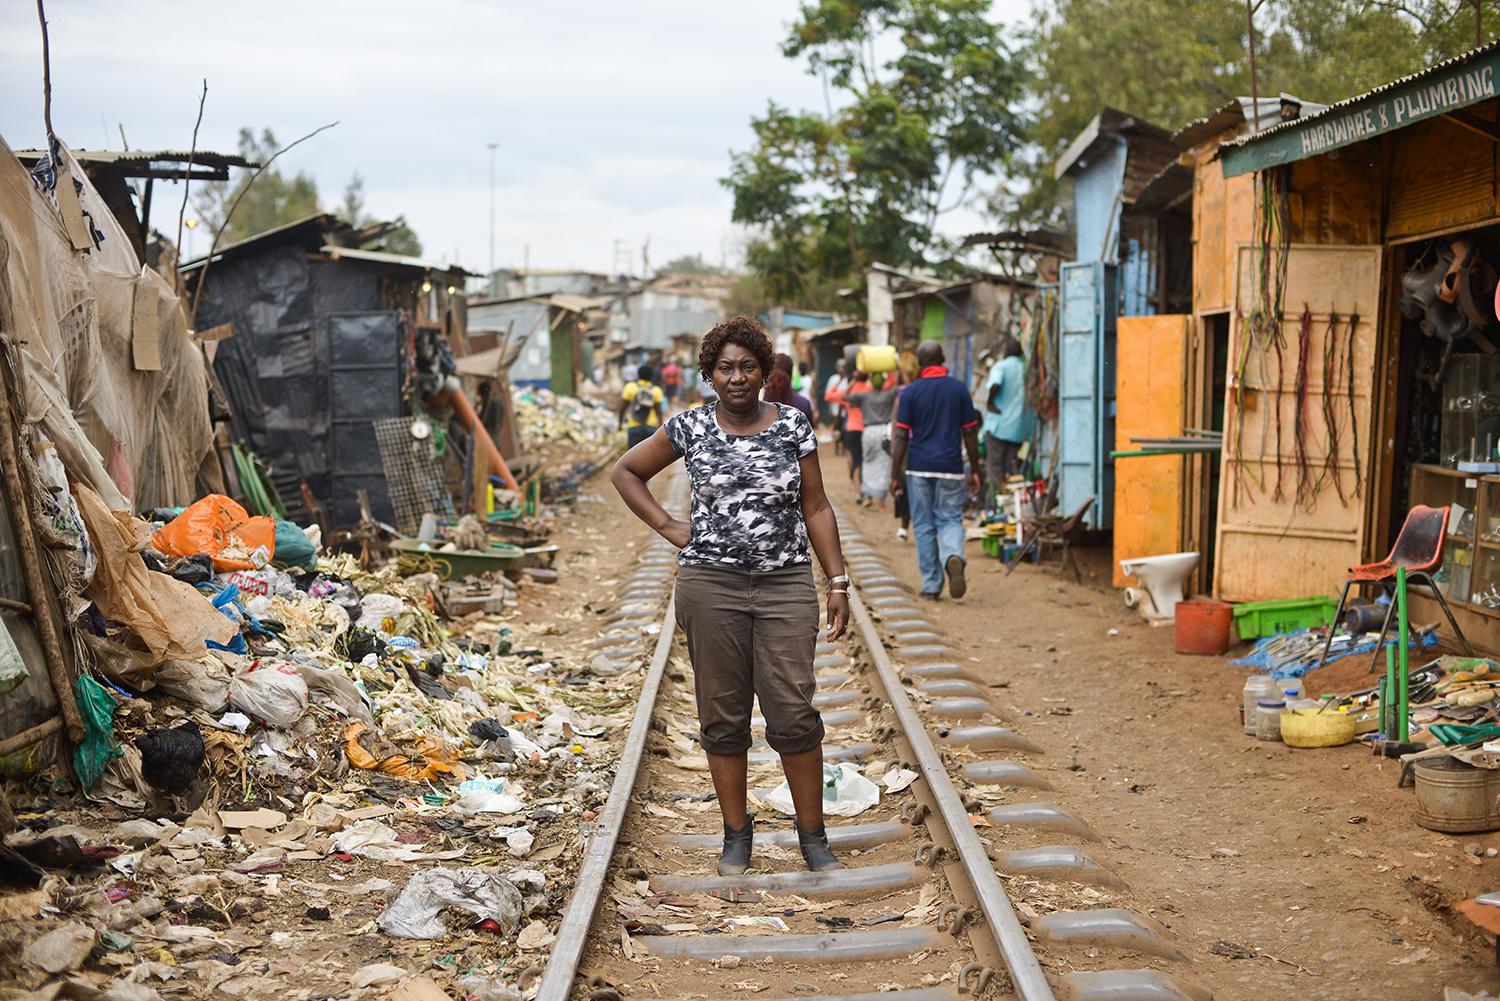 Jaqueline Mutere, 48, walks on a rail line in Kibera, the largest slum in Kenya, which was one of the hotspots of the post-election violence. 